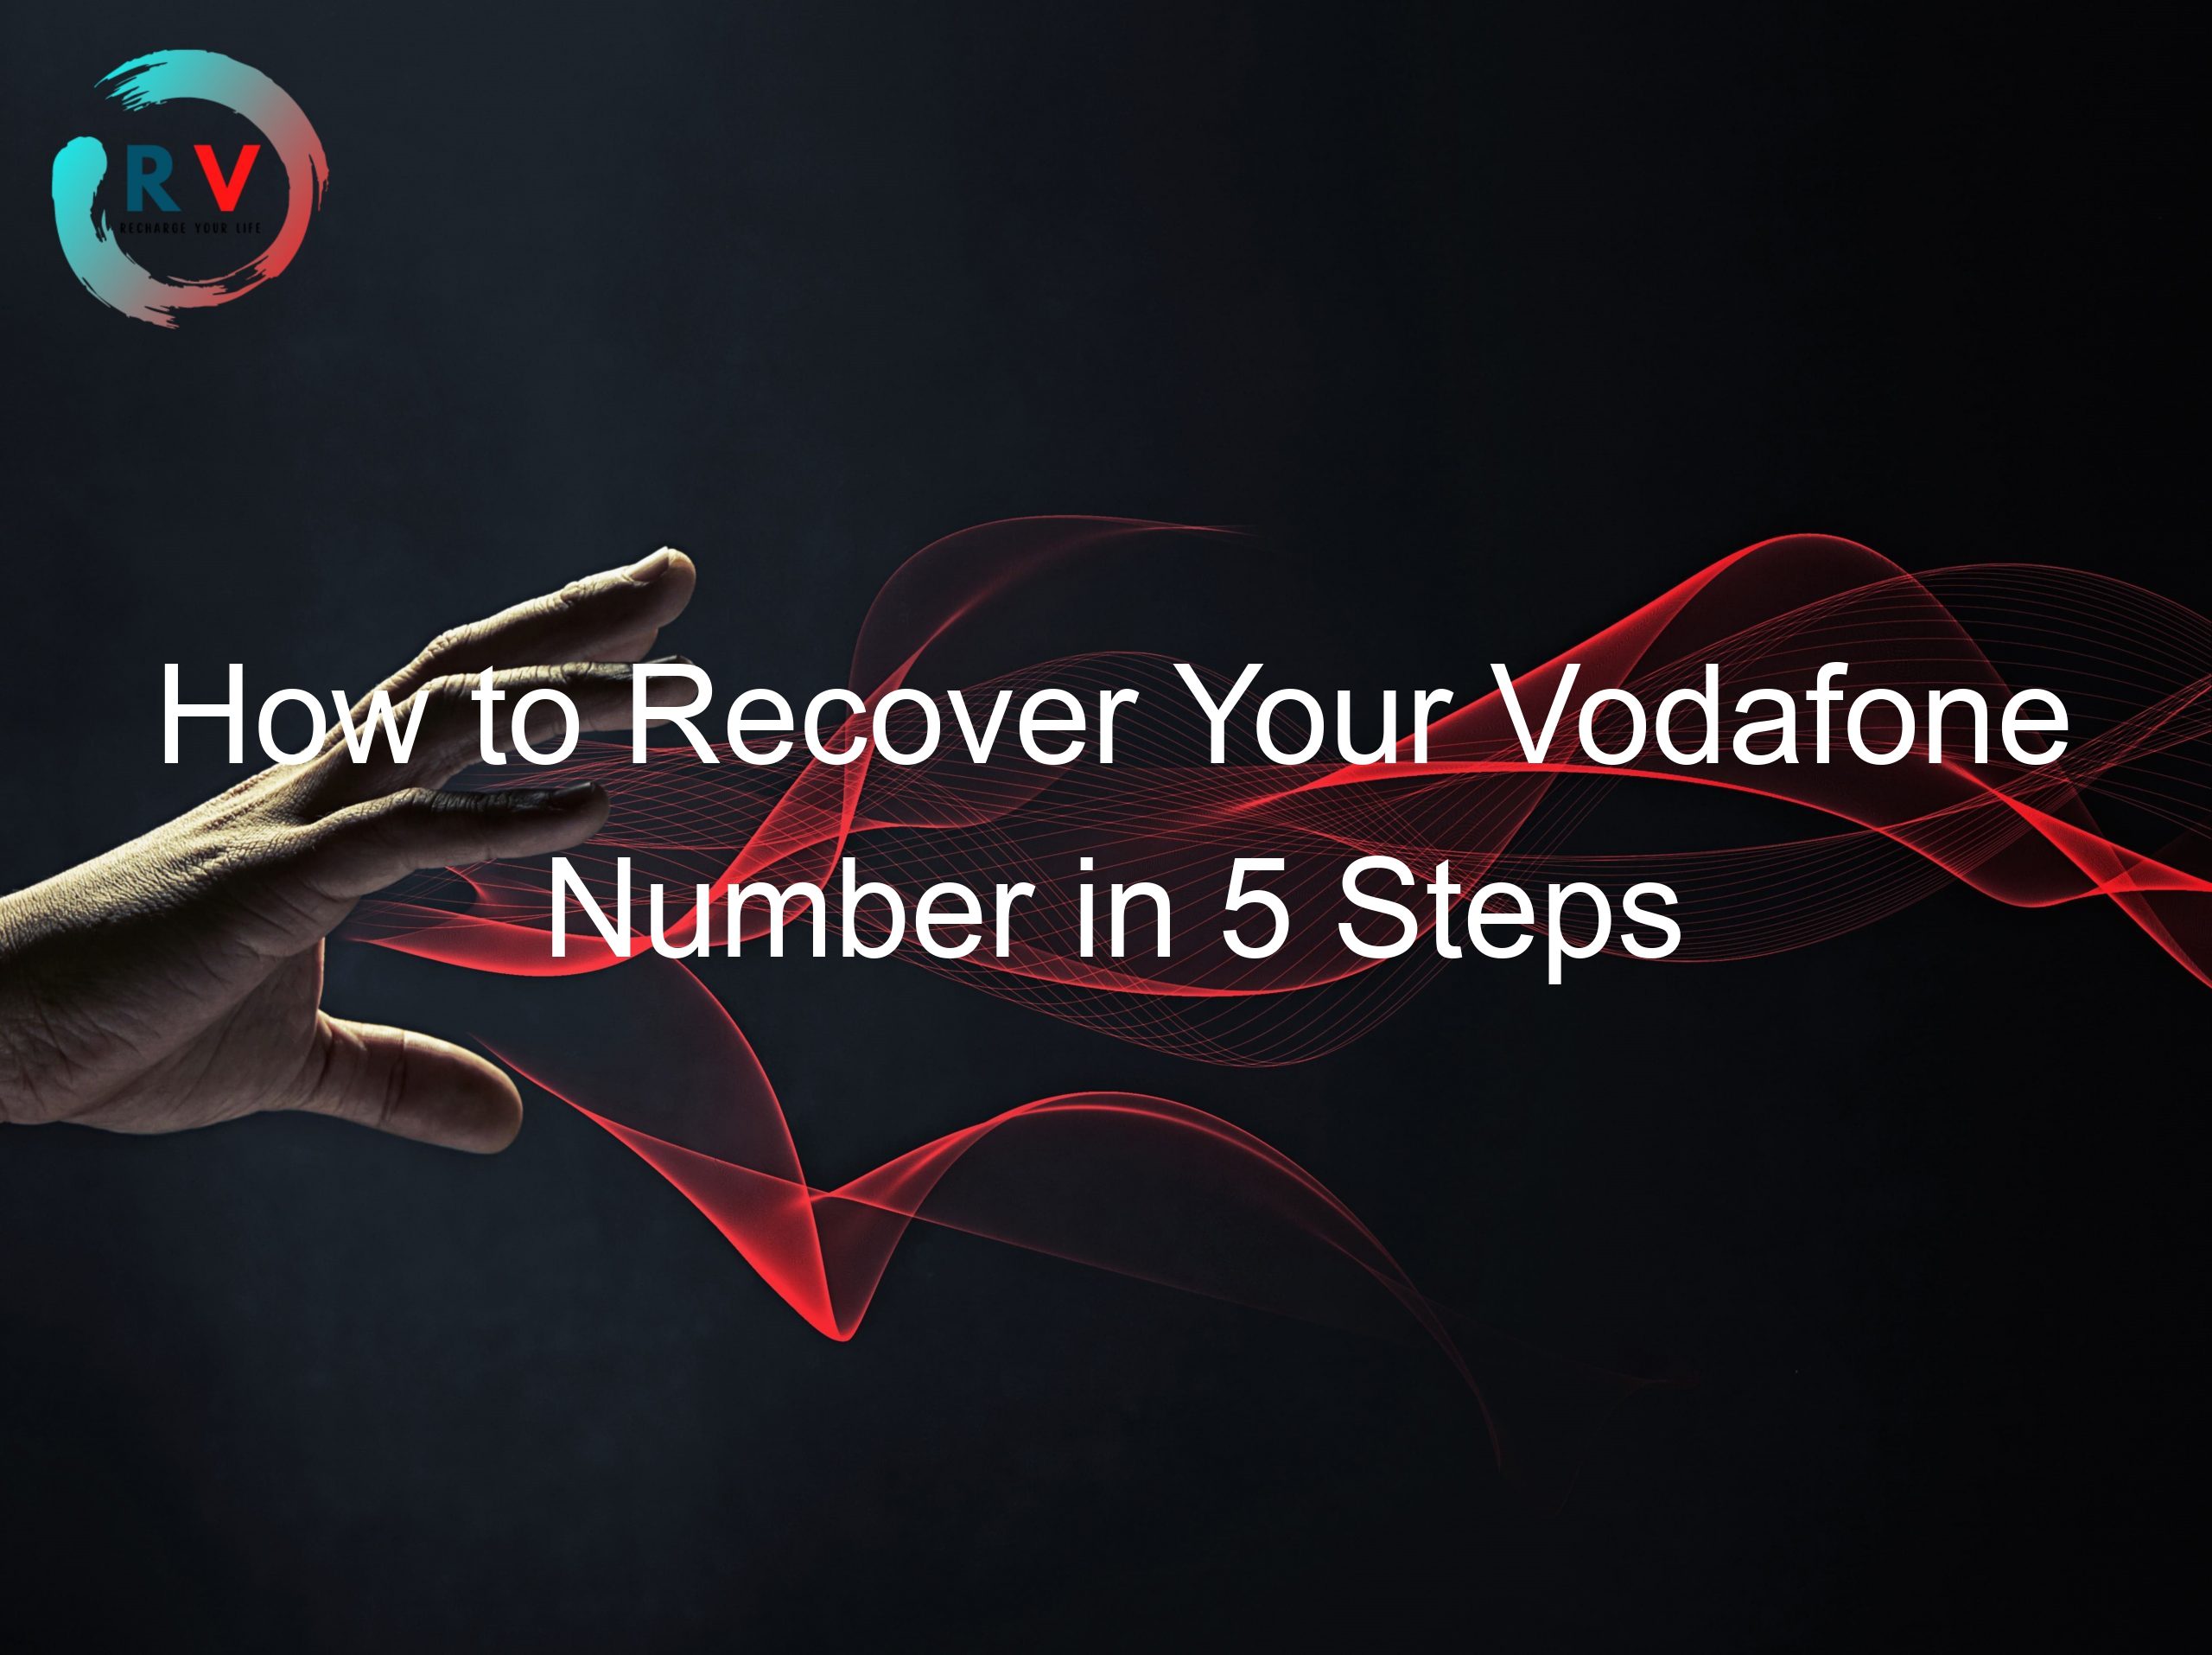 How to Recover Your Vodafone Number in 5 Steps